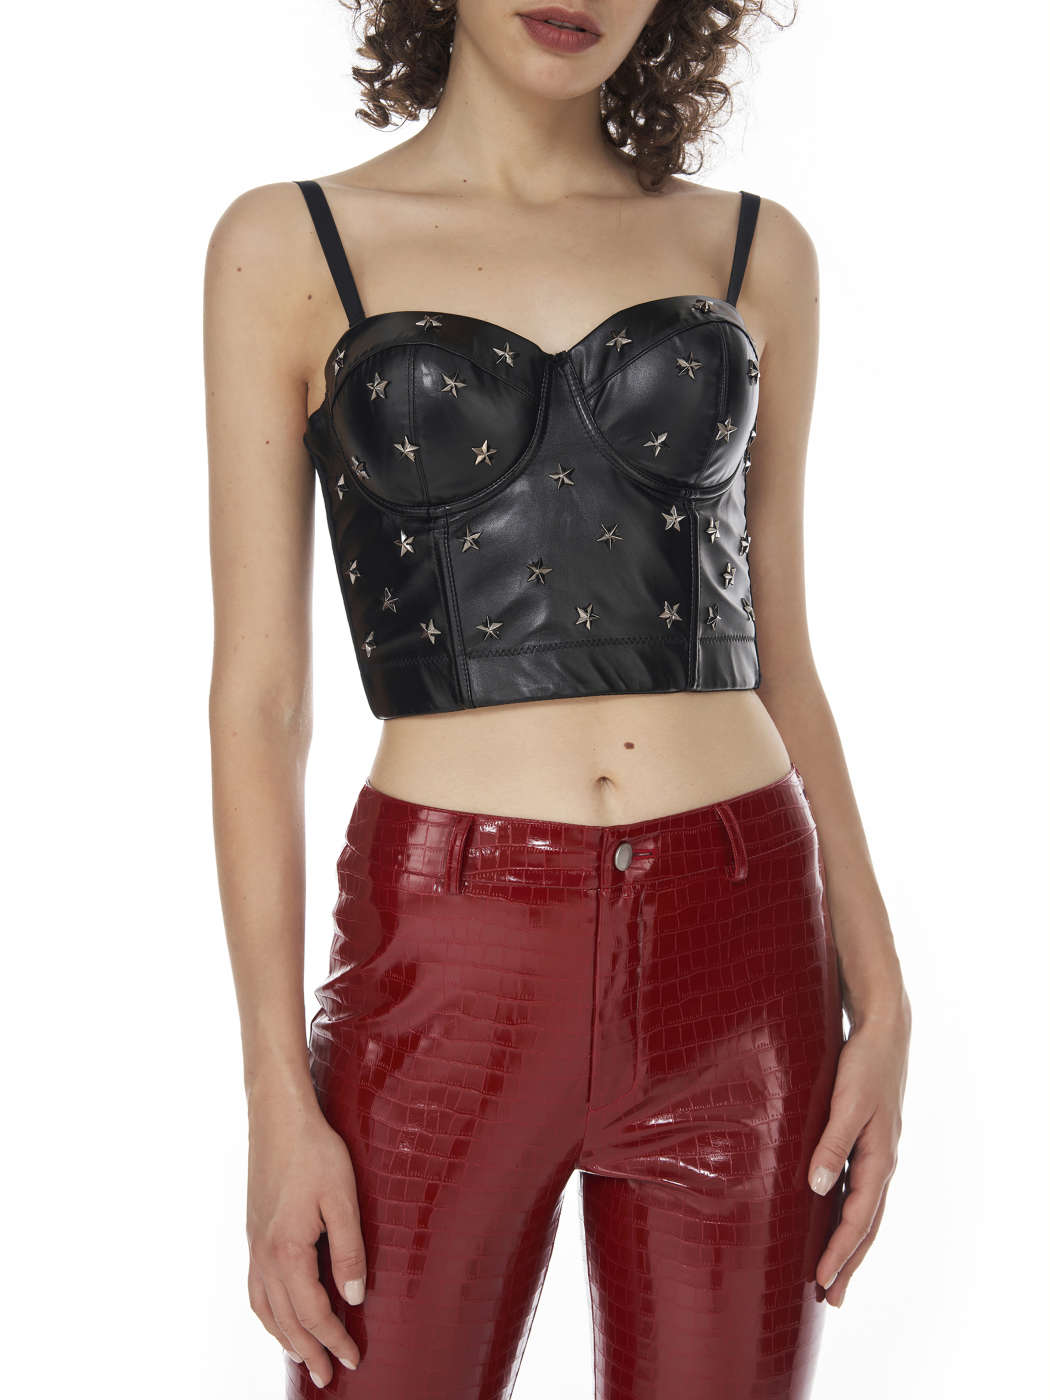 Under The Stars Leather Bustier Top